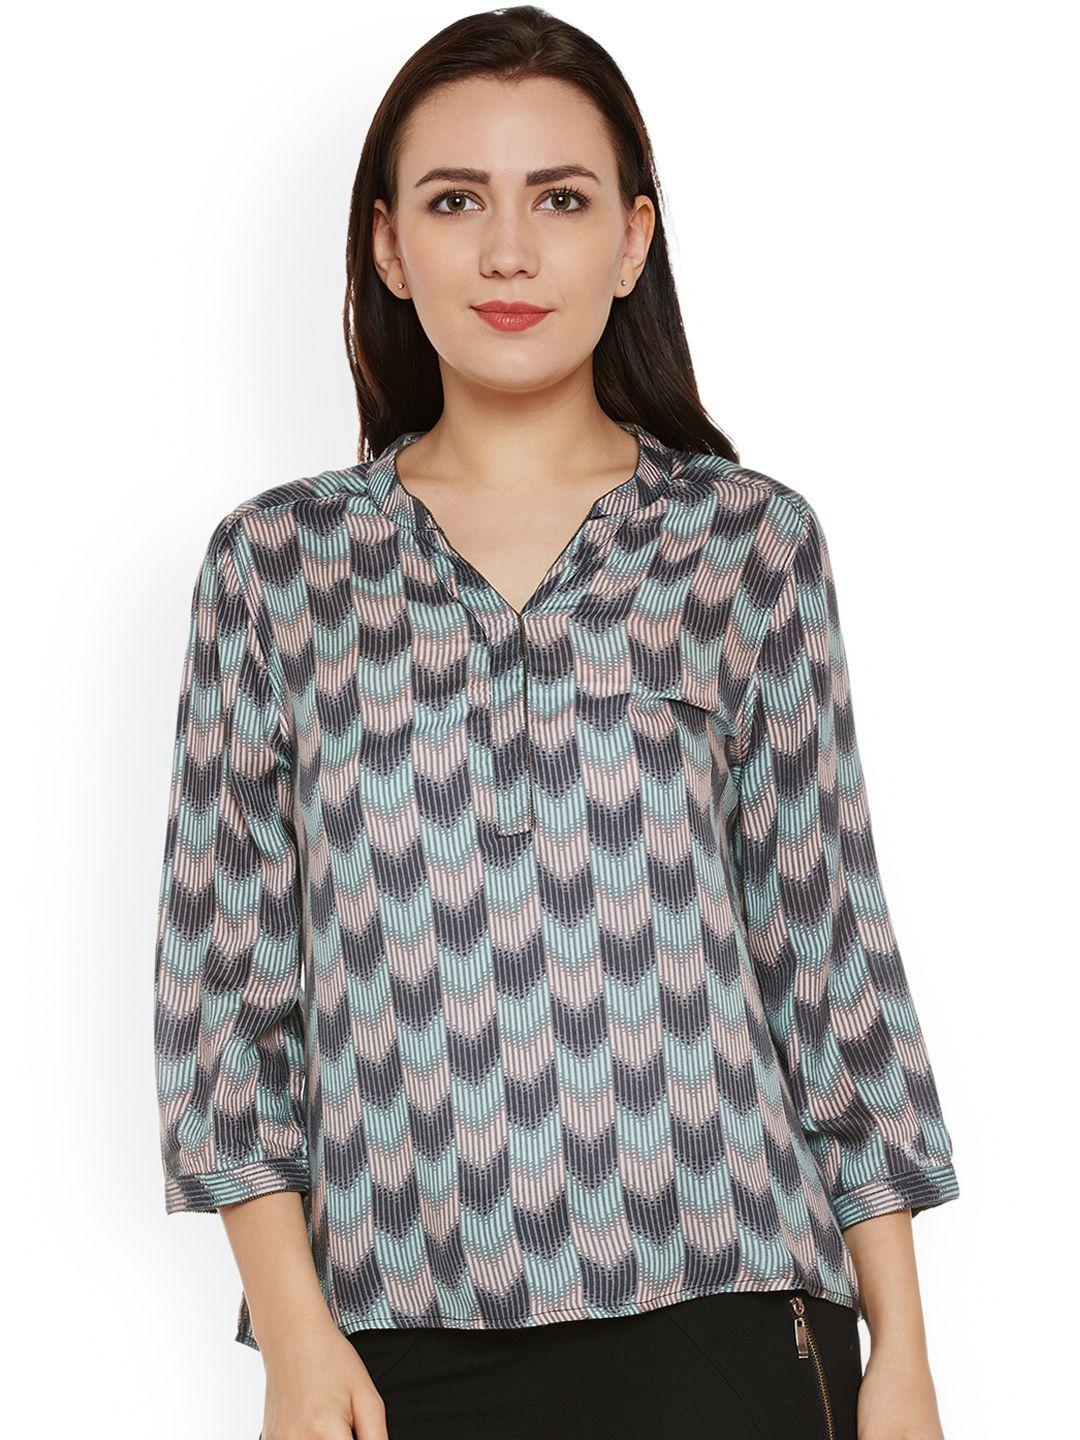 oxolloxo-women-charcoal-grey-&-peach-coloured-printed-top